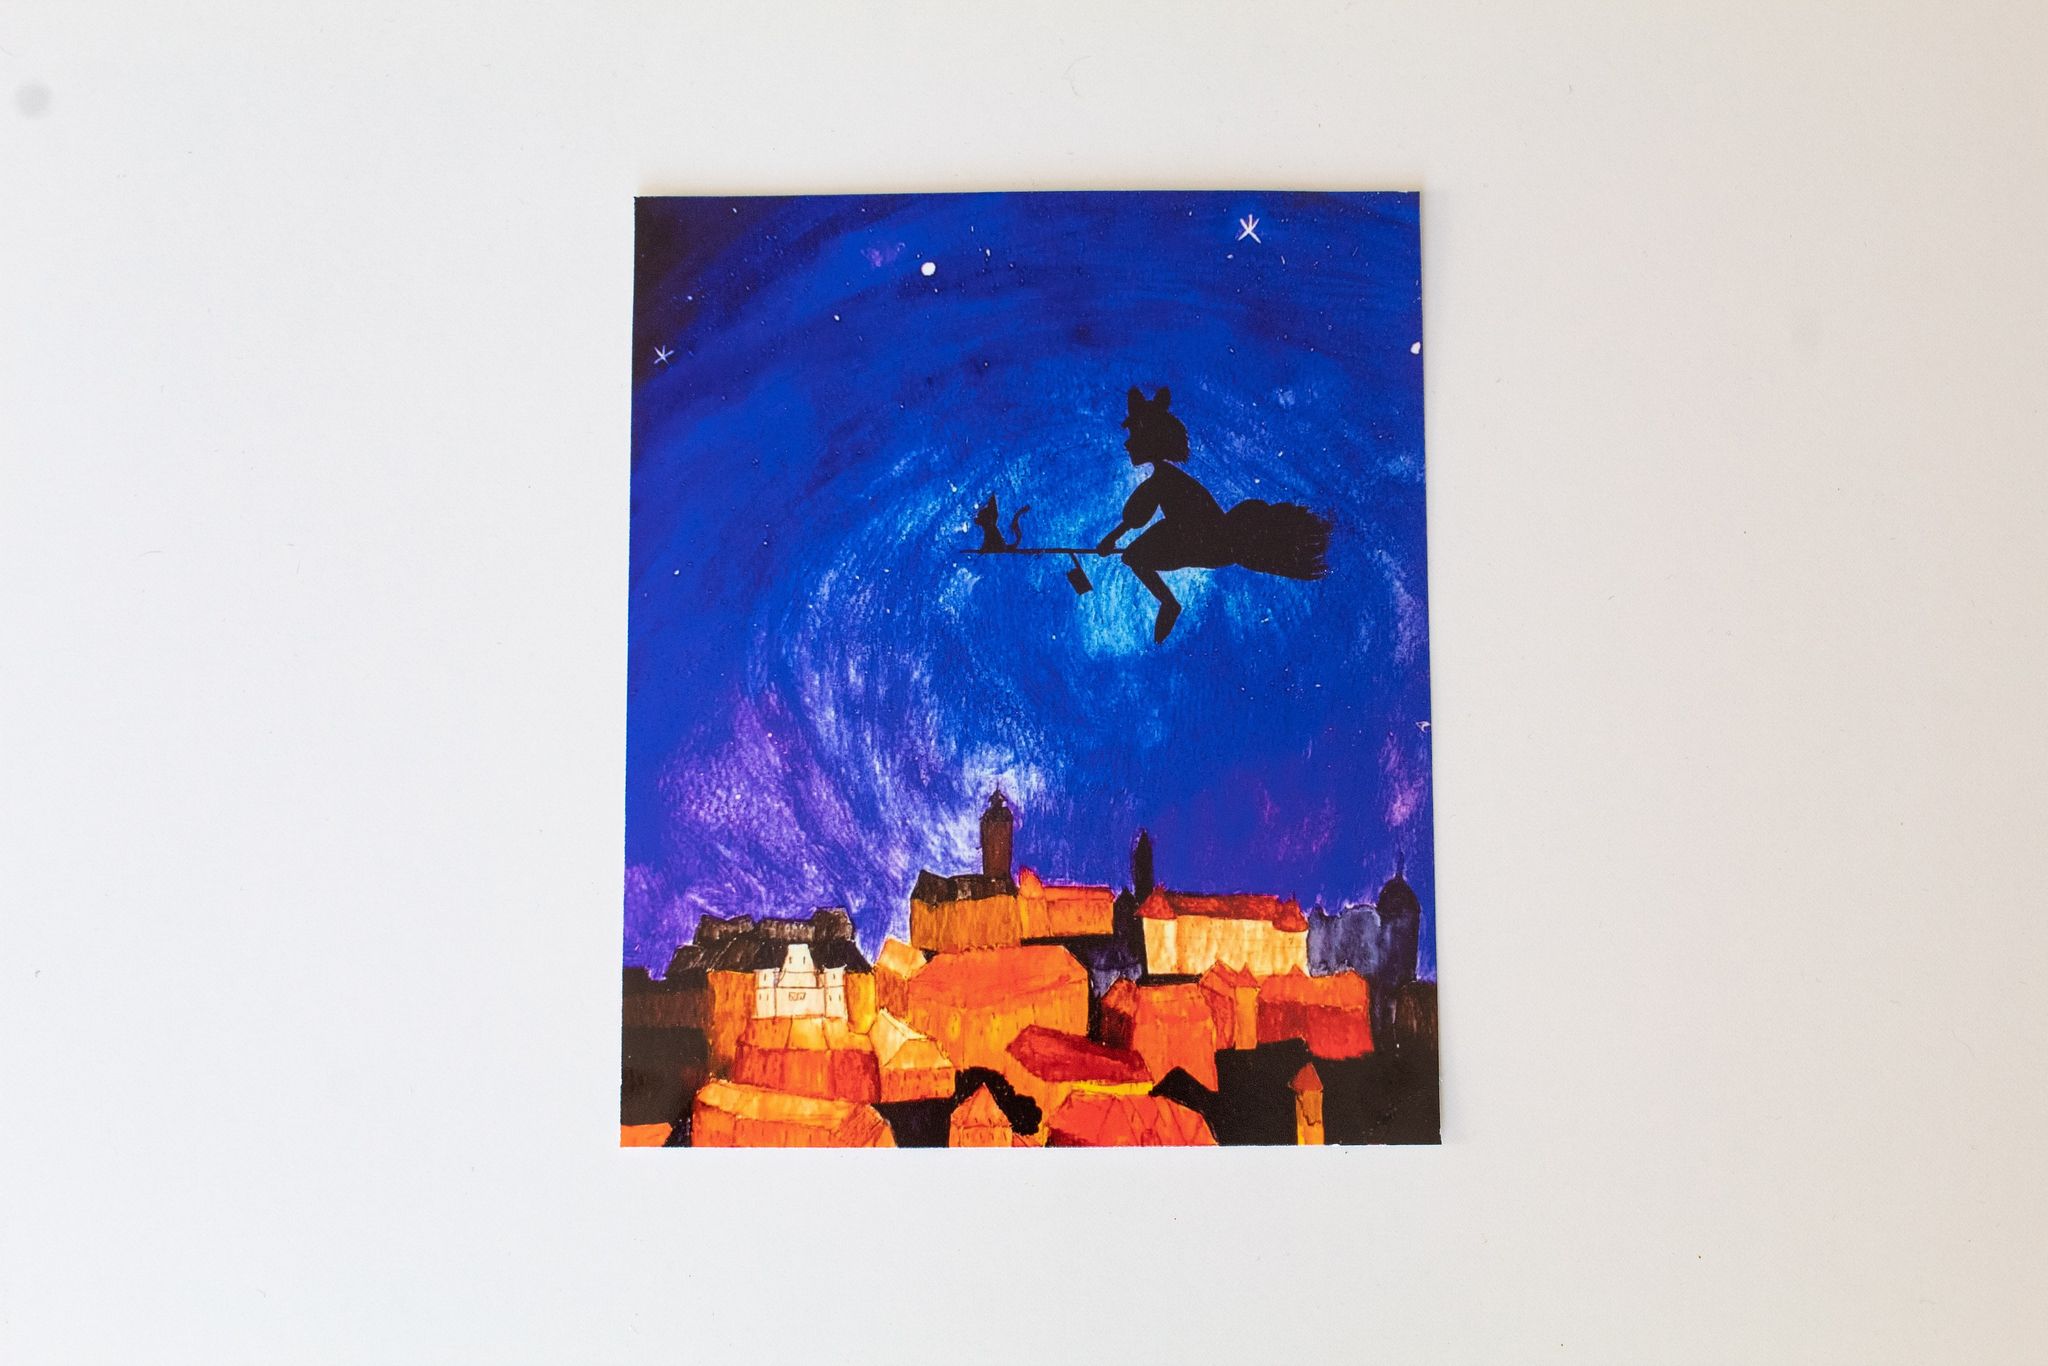 Product image of a print depicted a backlit witch girl atop a broom with a cat flying over an illuminated orange and yellow city, set against a dark blue and purple night sky